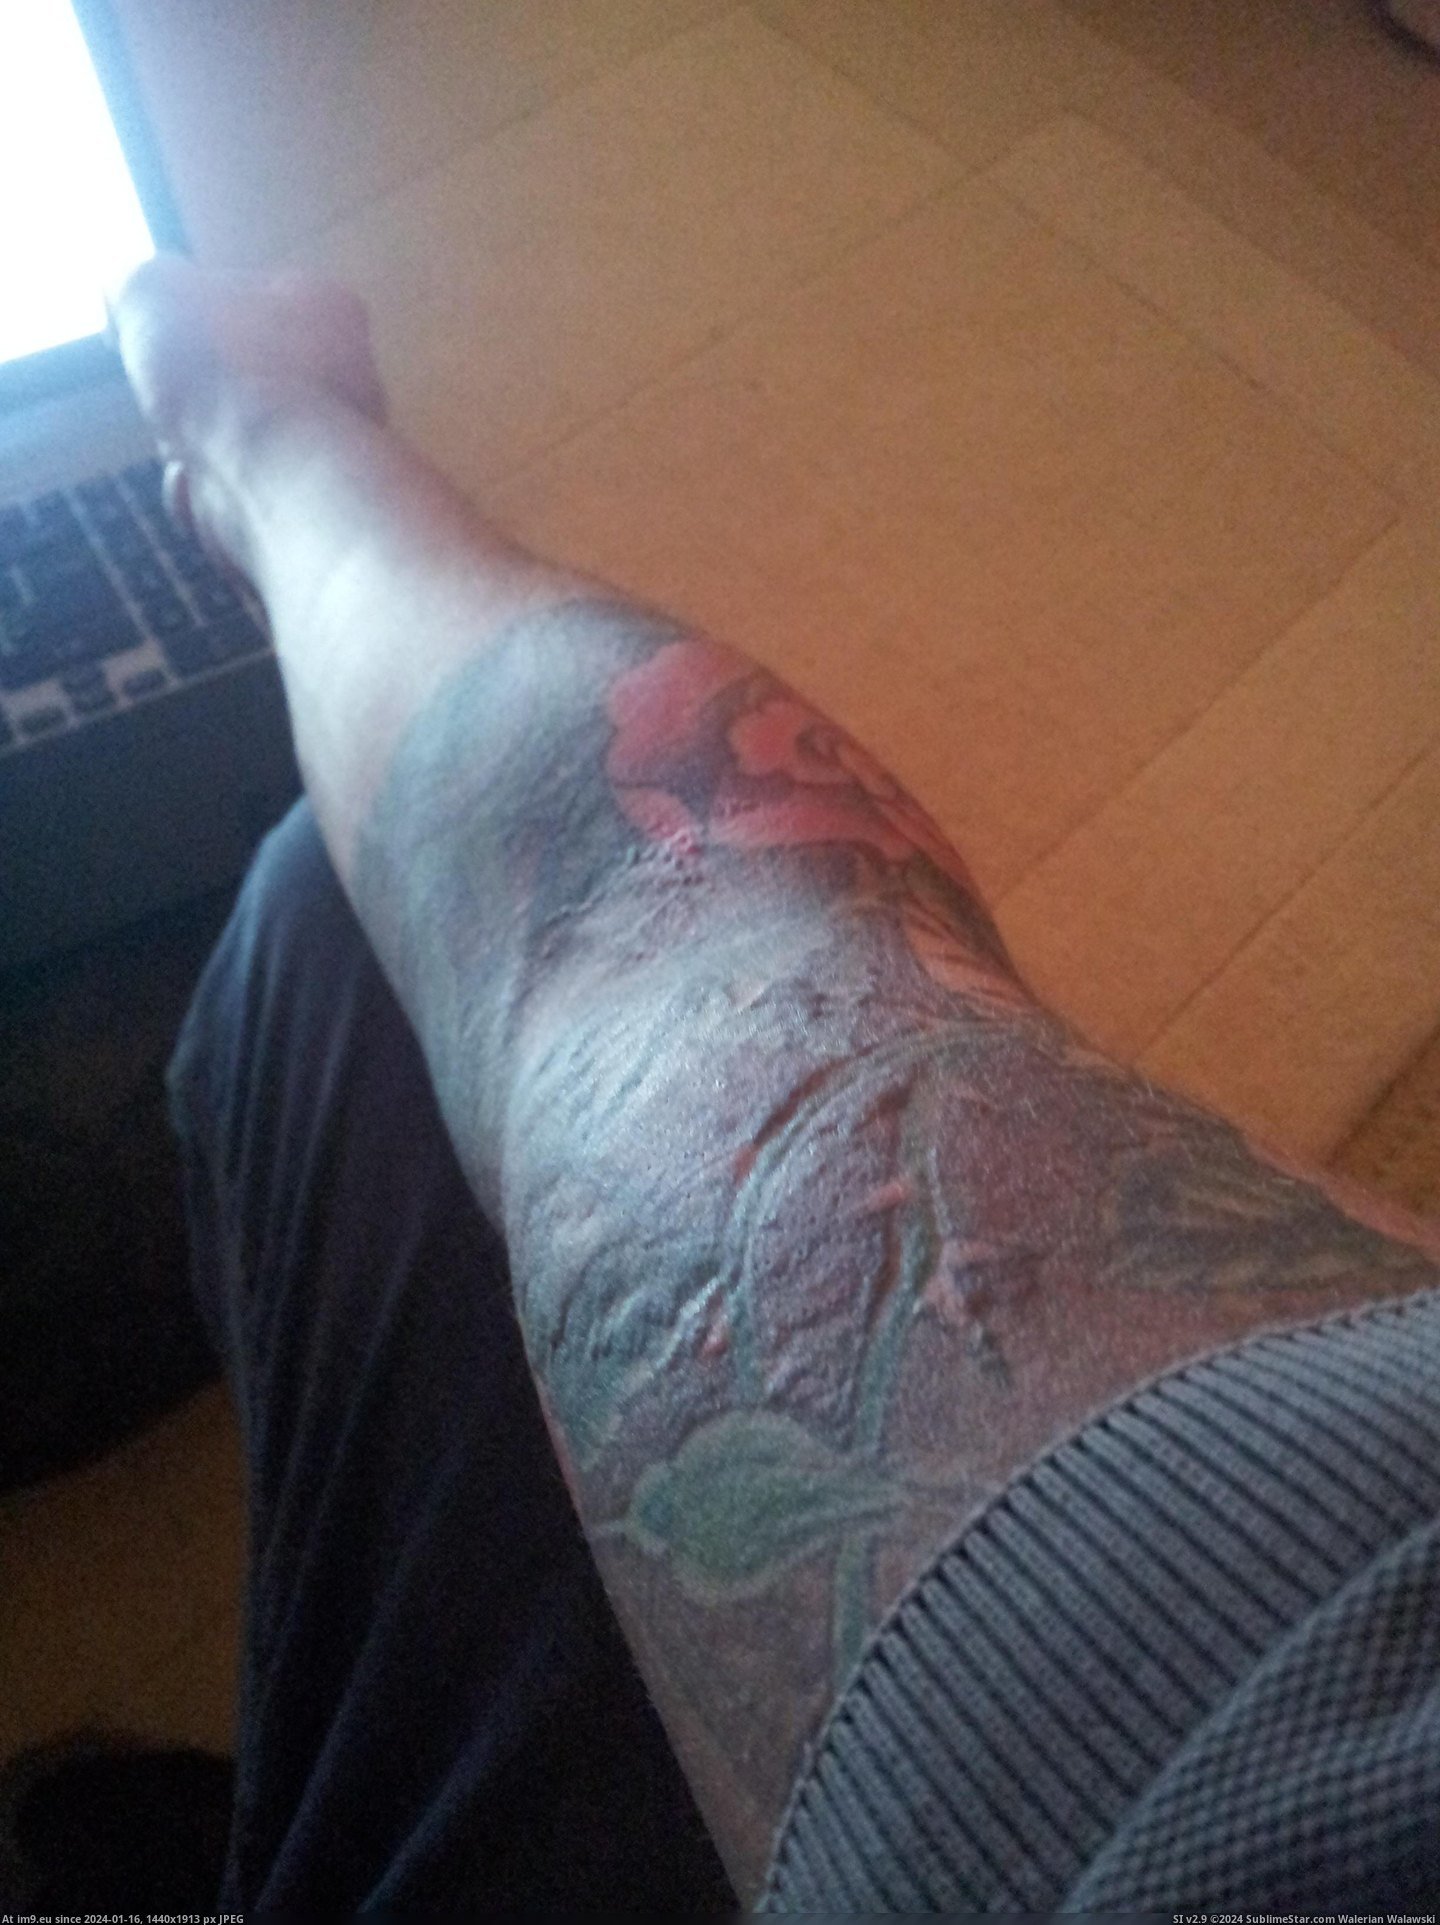 #Tattoo #Reaction #Allergic #Lines [Mildlyinteresting] An allergic reaction followed the lines of my tattoo. Pic. (Obraz z album My r/MILDLYINTERESTING favs))